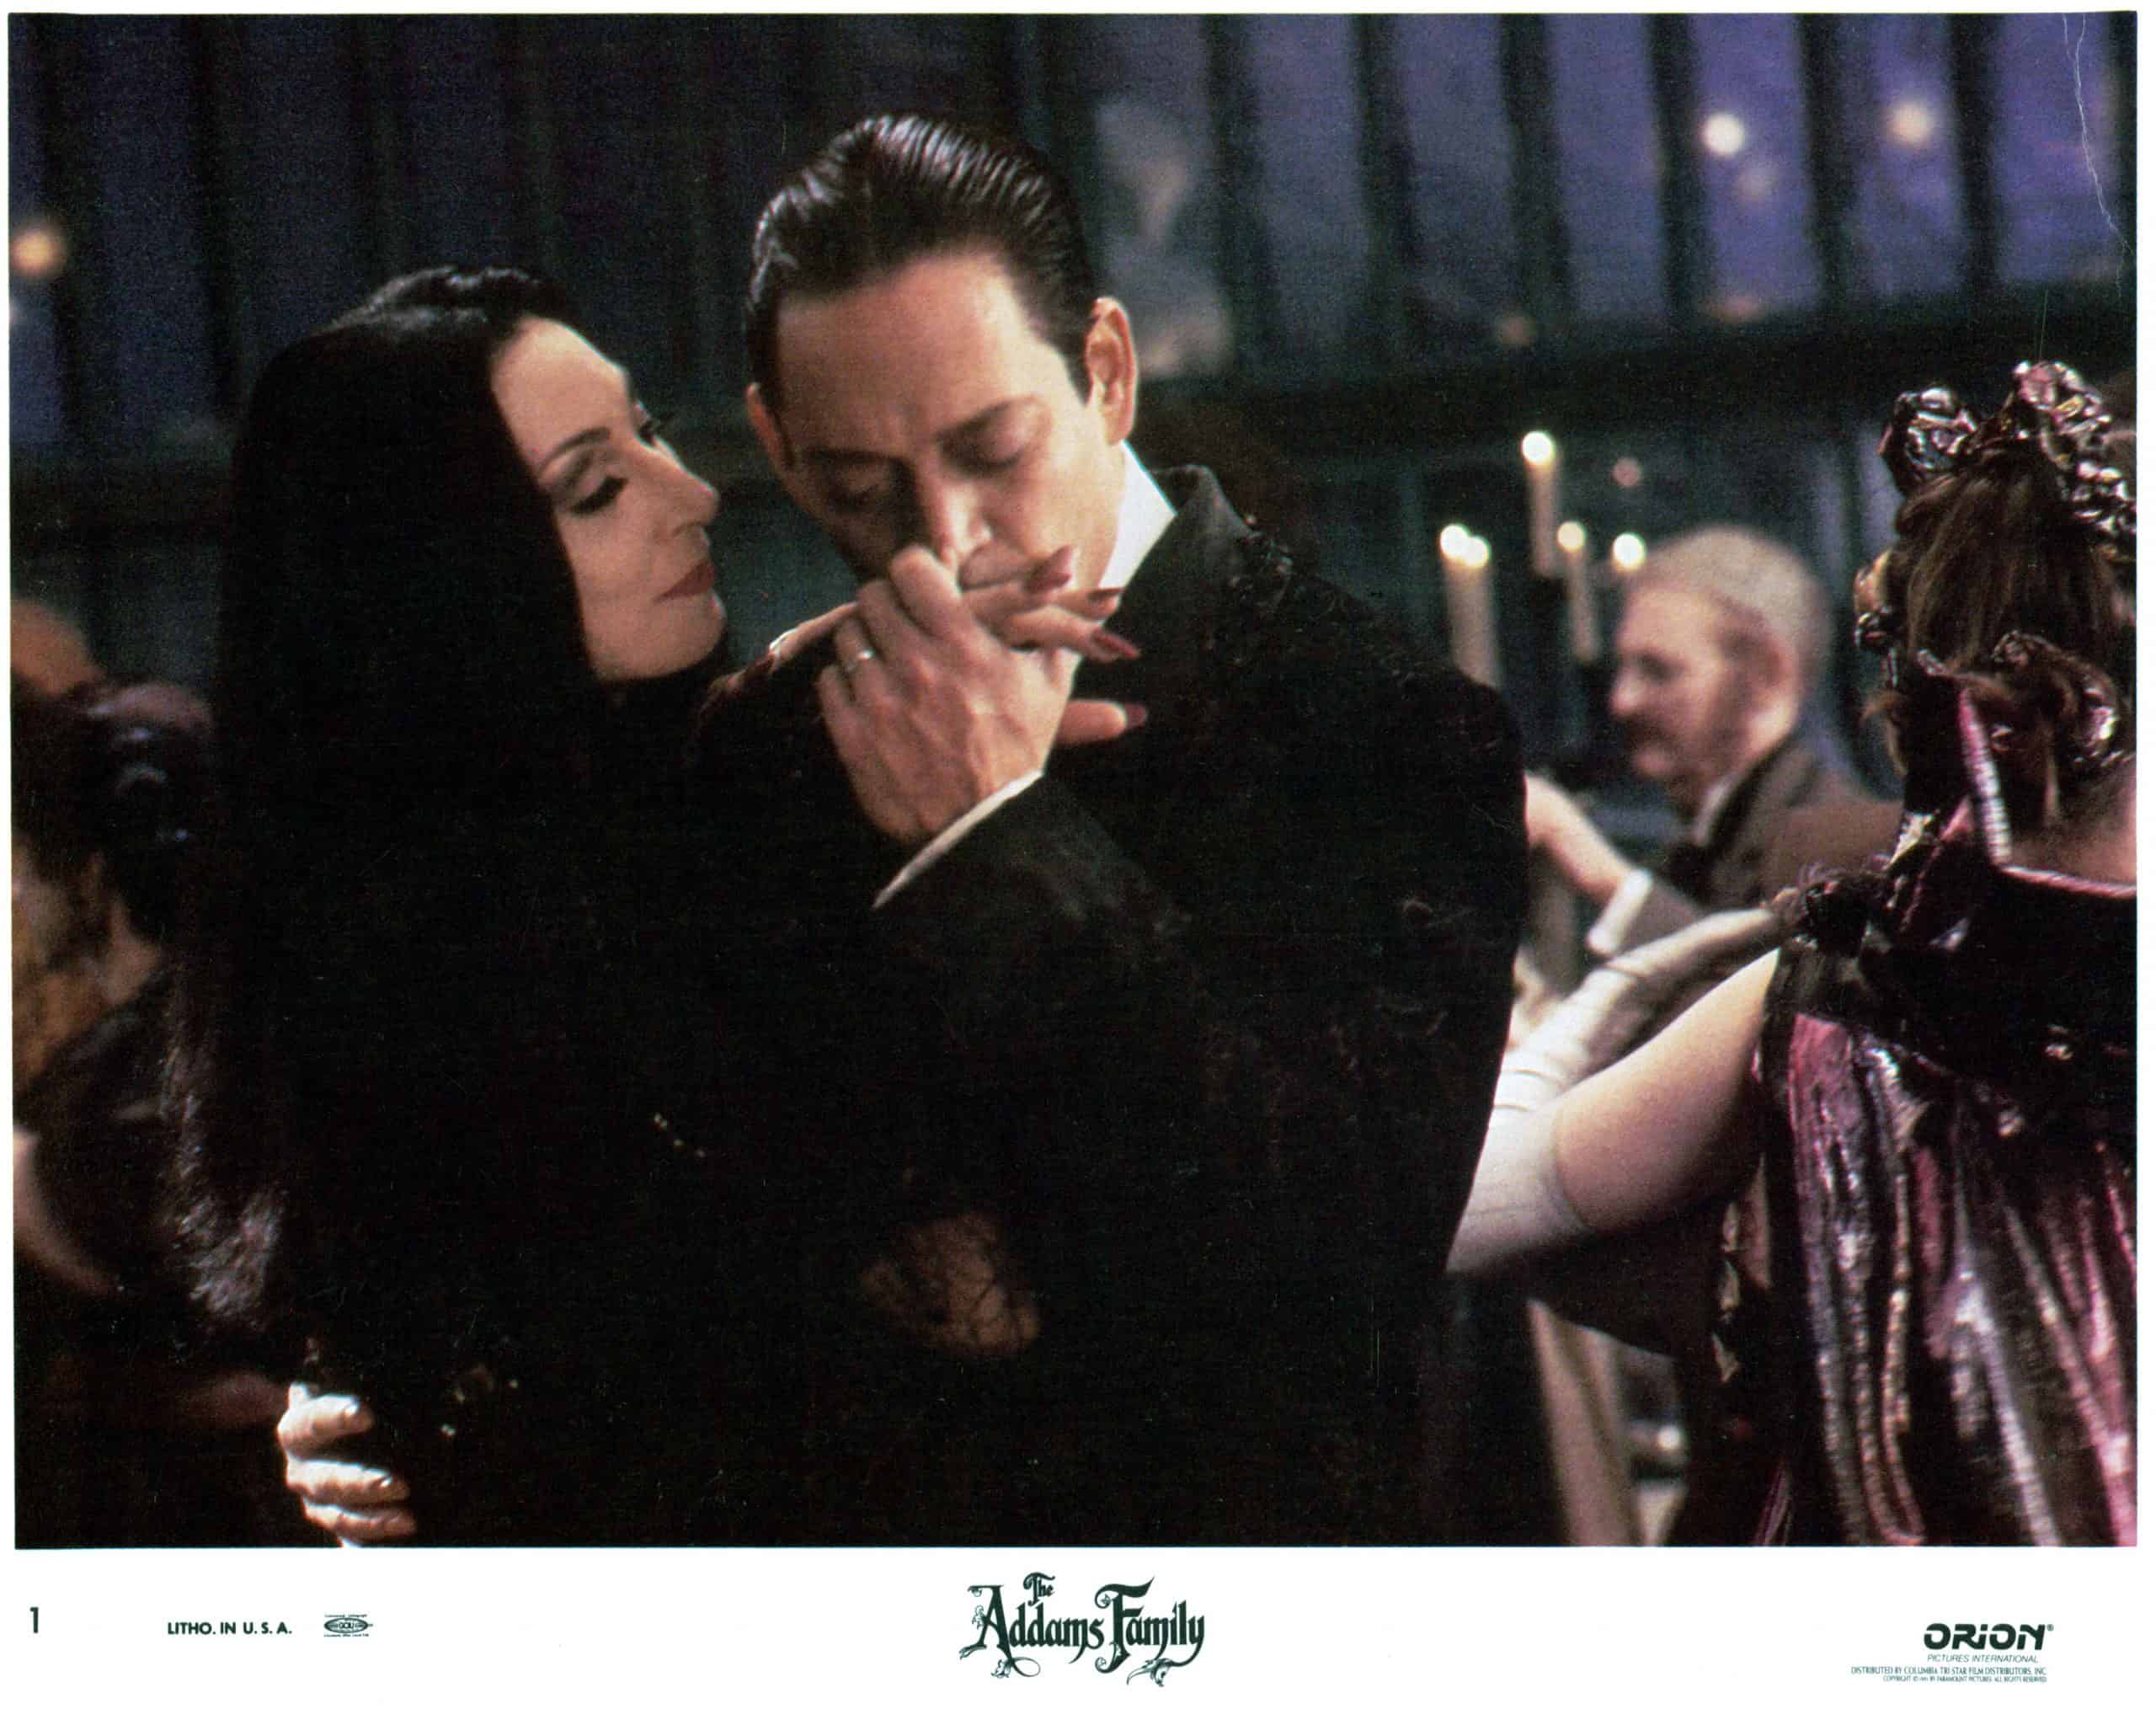 Gomez kissing Morticia’s hand as they dance